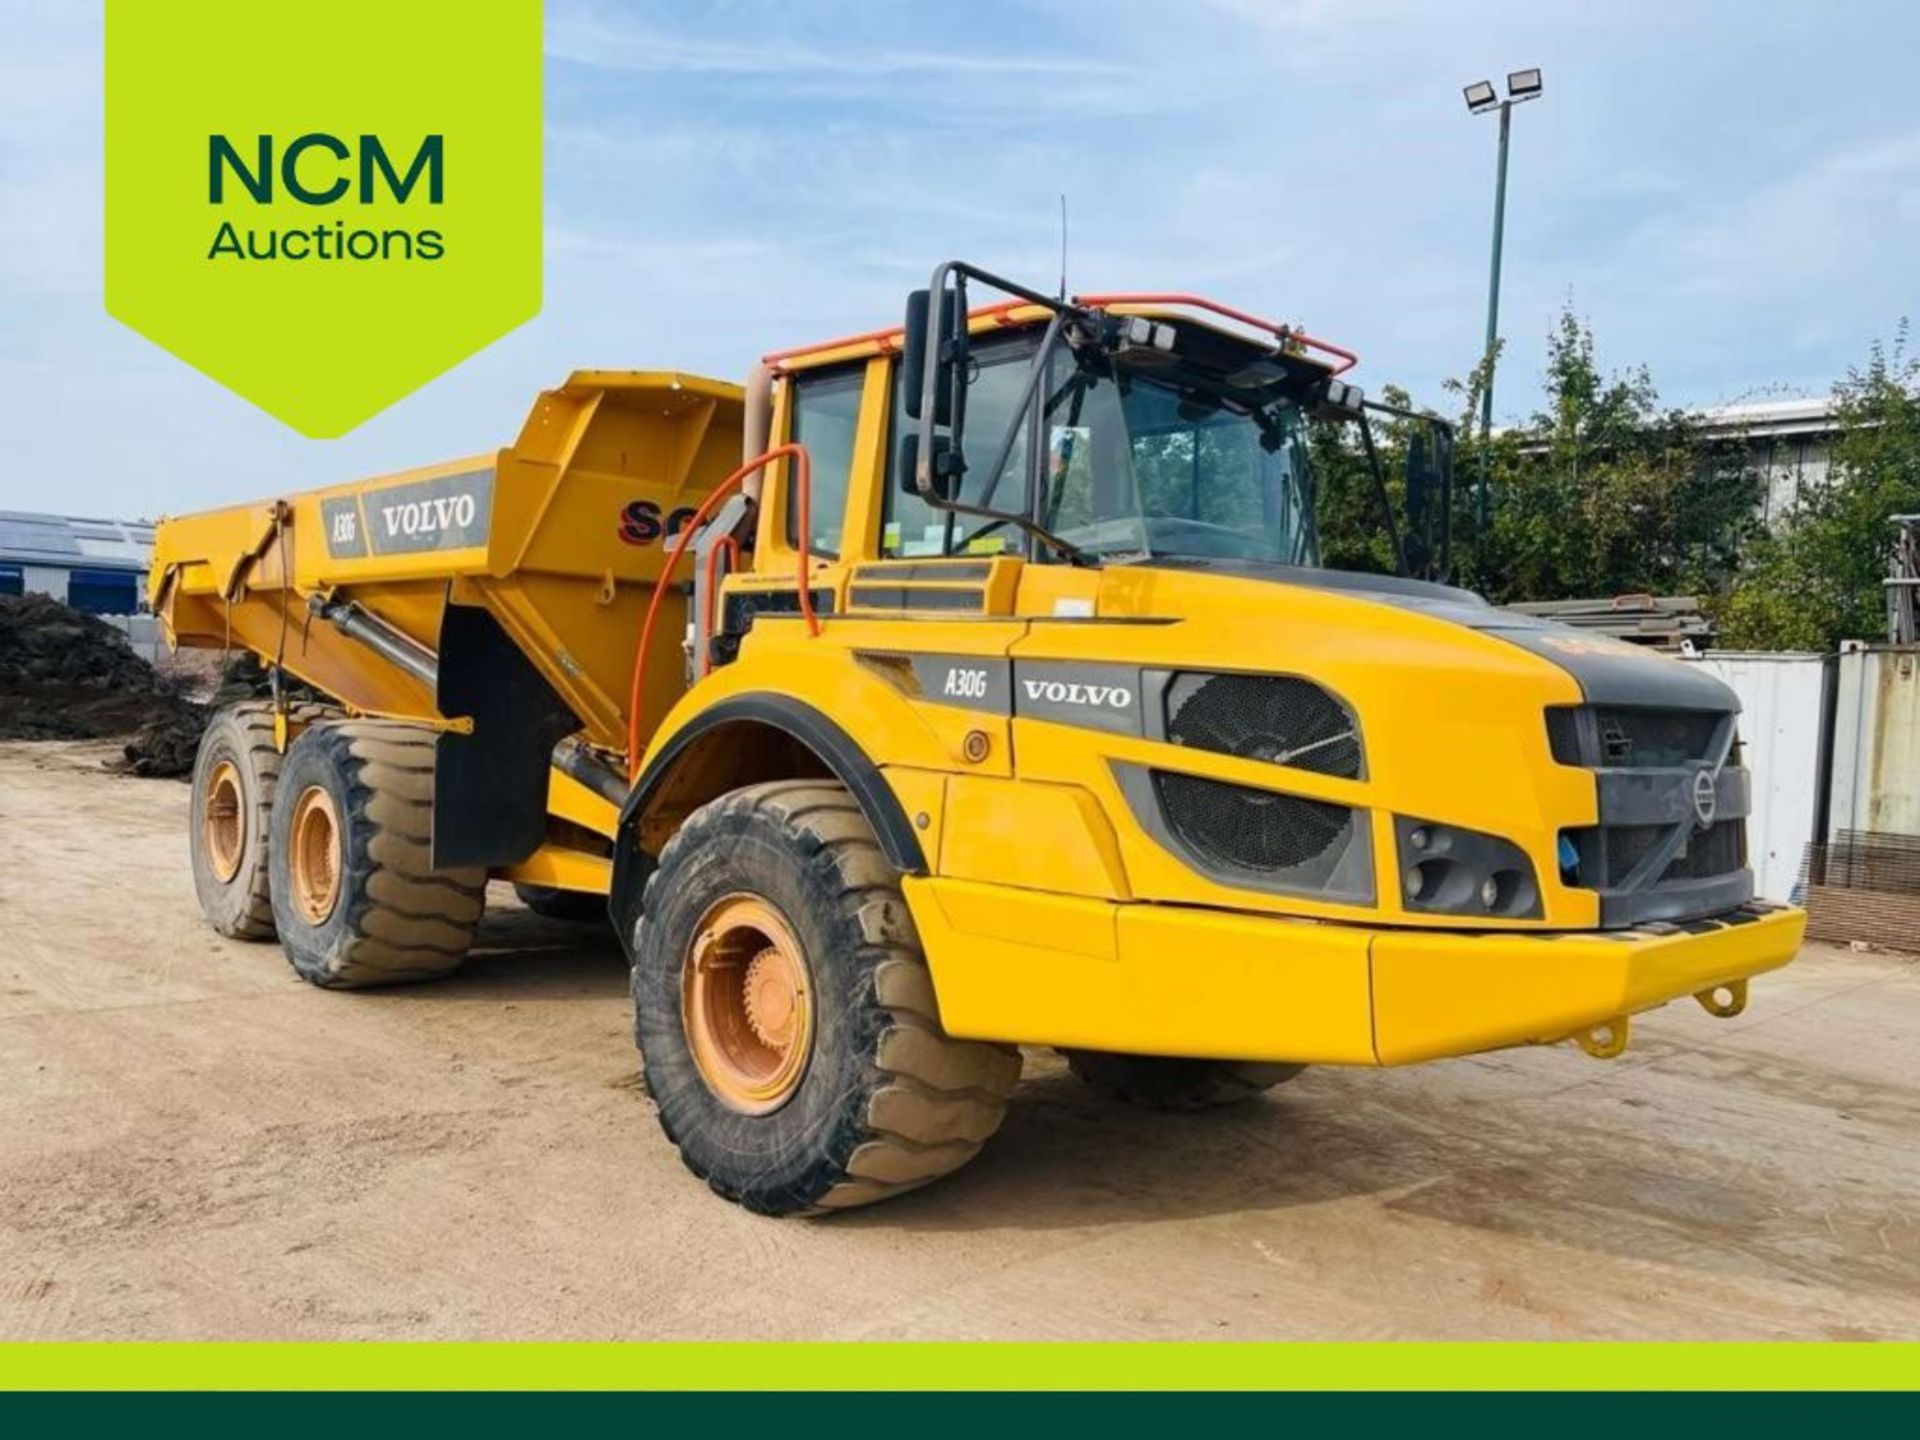 Sell your Plant, Machinery, Commercial Vehicles & Industrial Assets with NCM Auctions! - Image 3 of 3